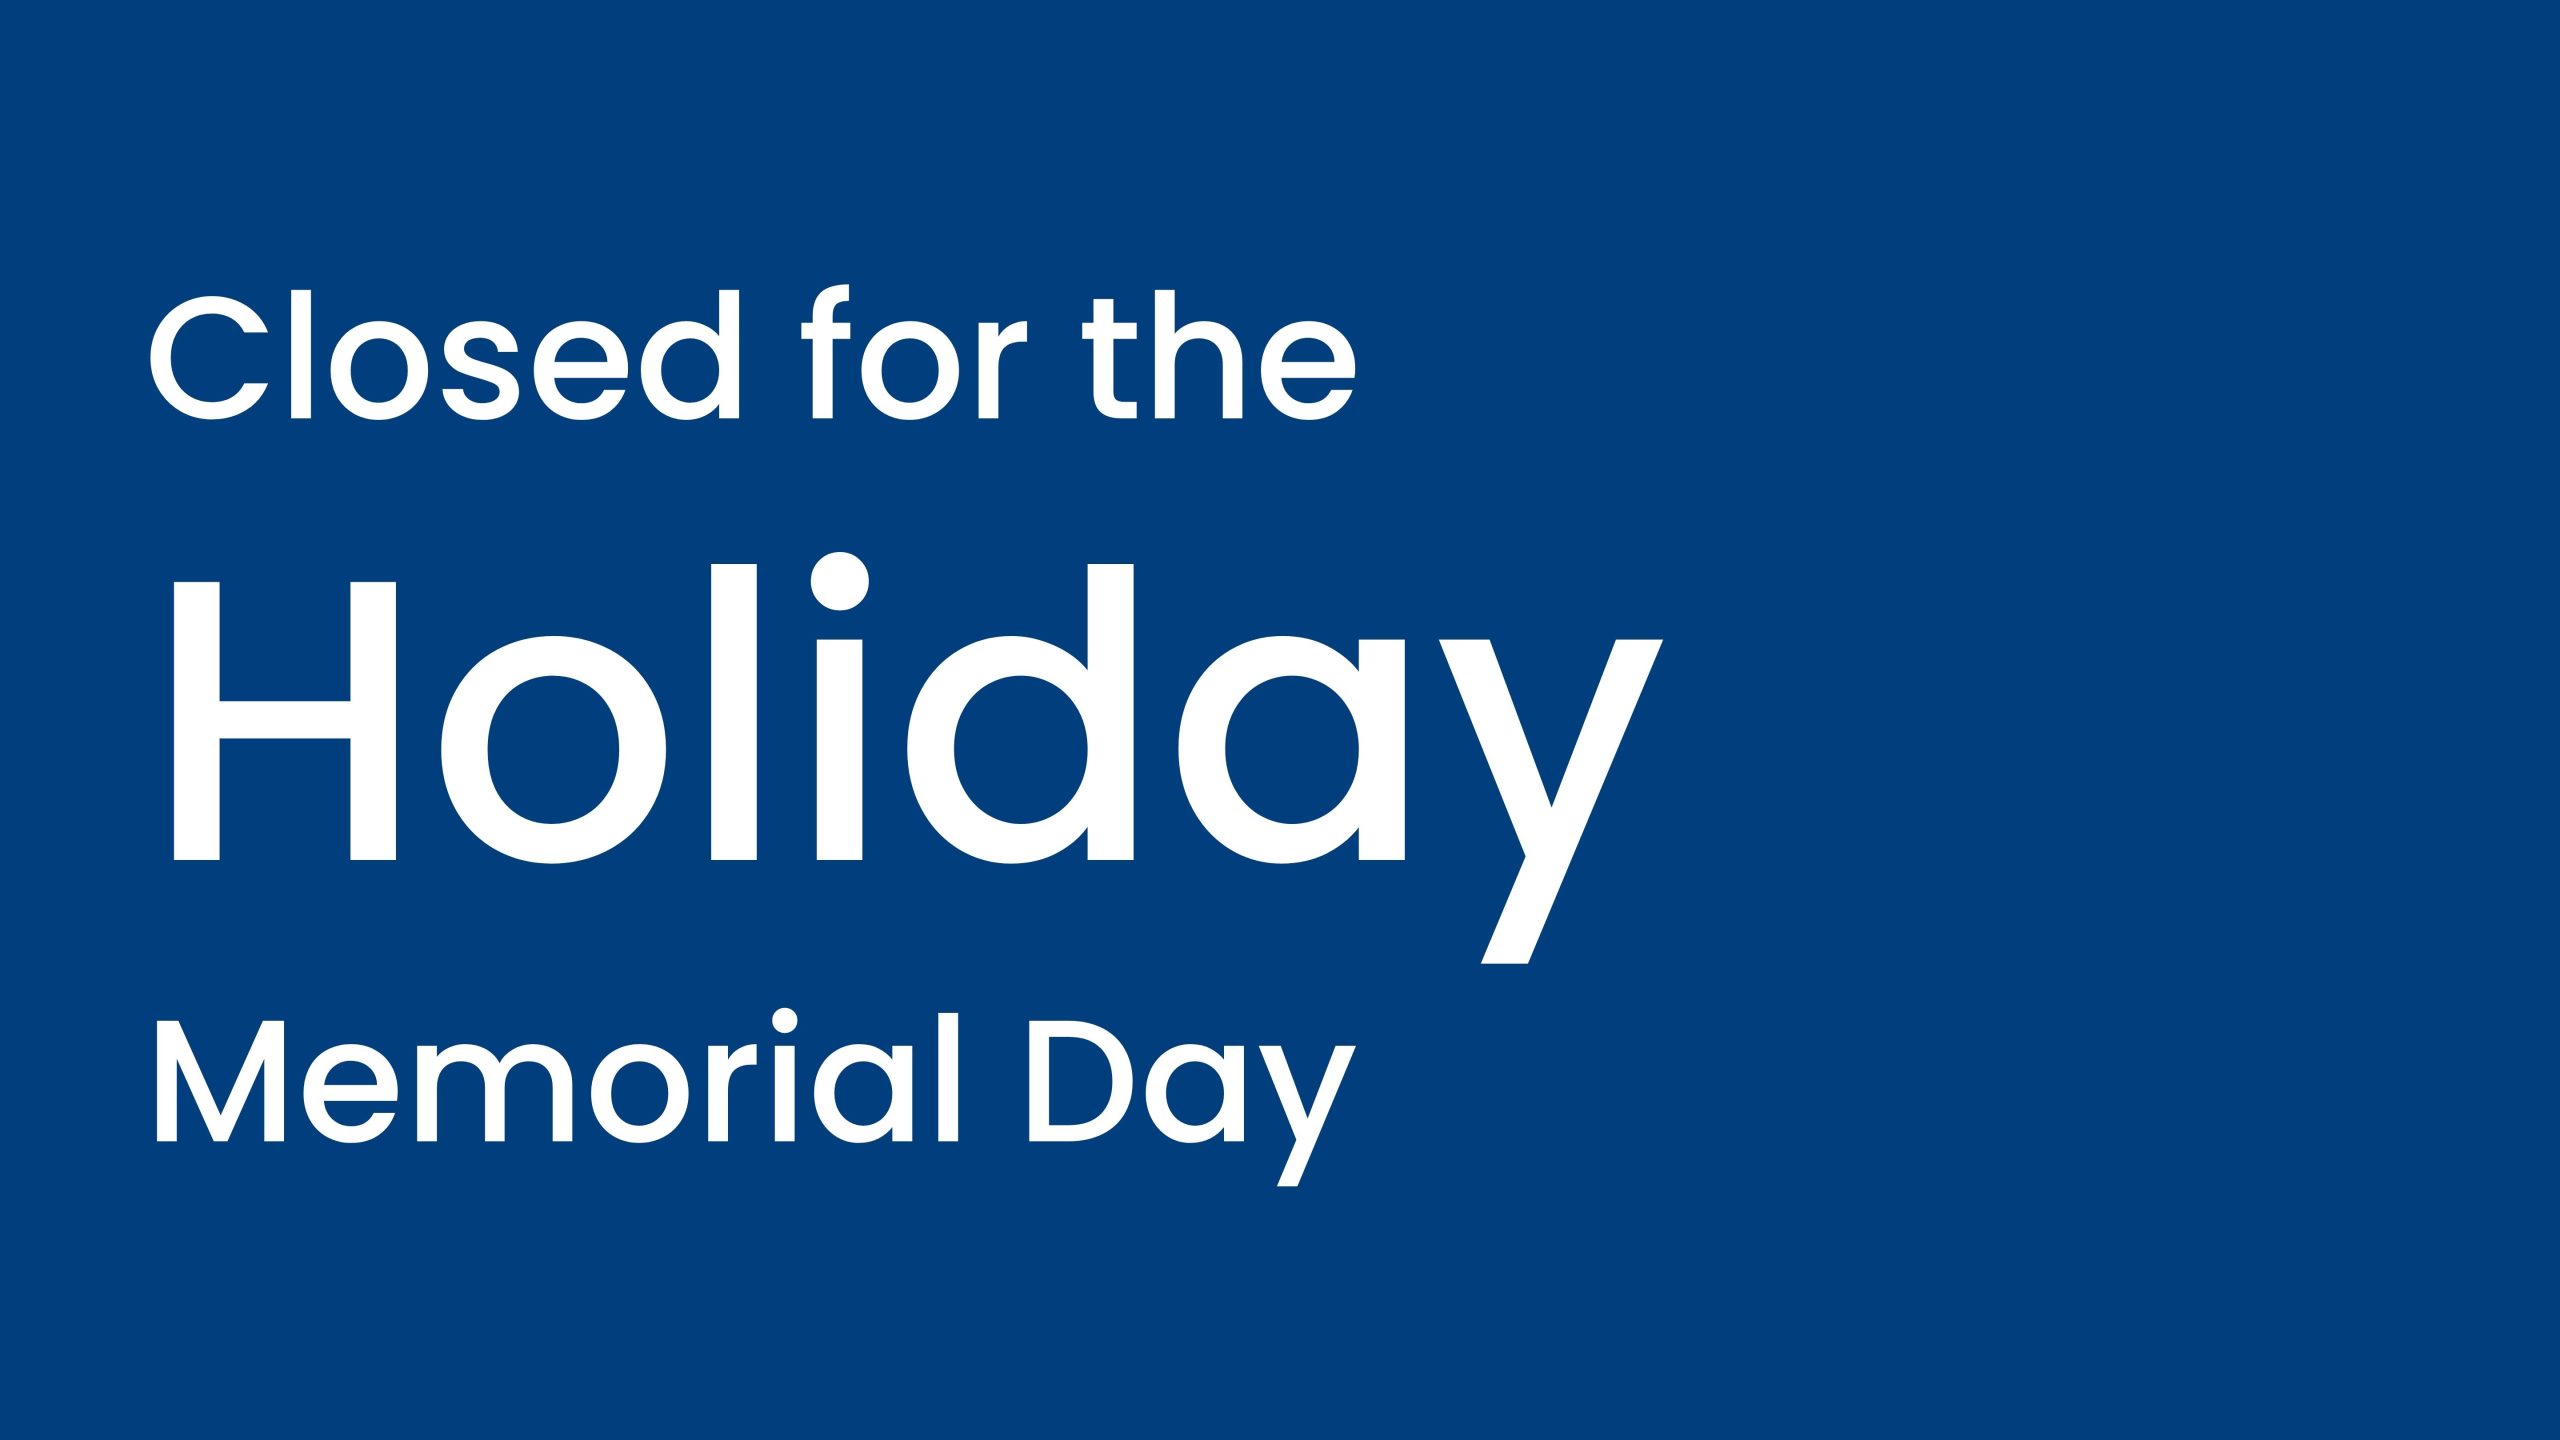 Closed for the Holiday: Memorial Day